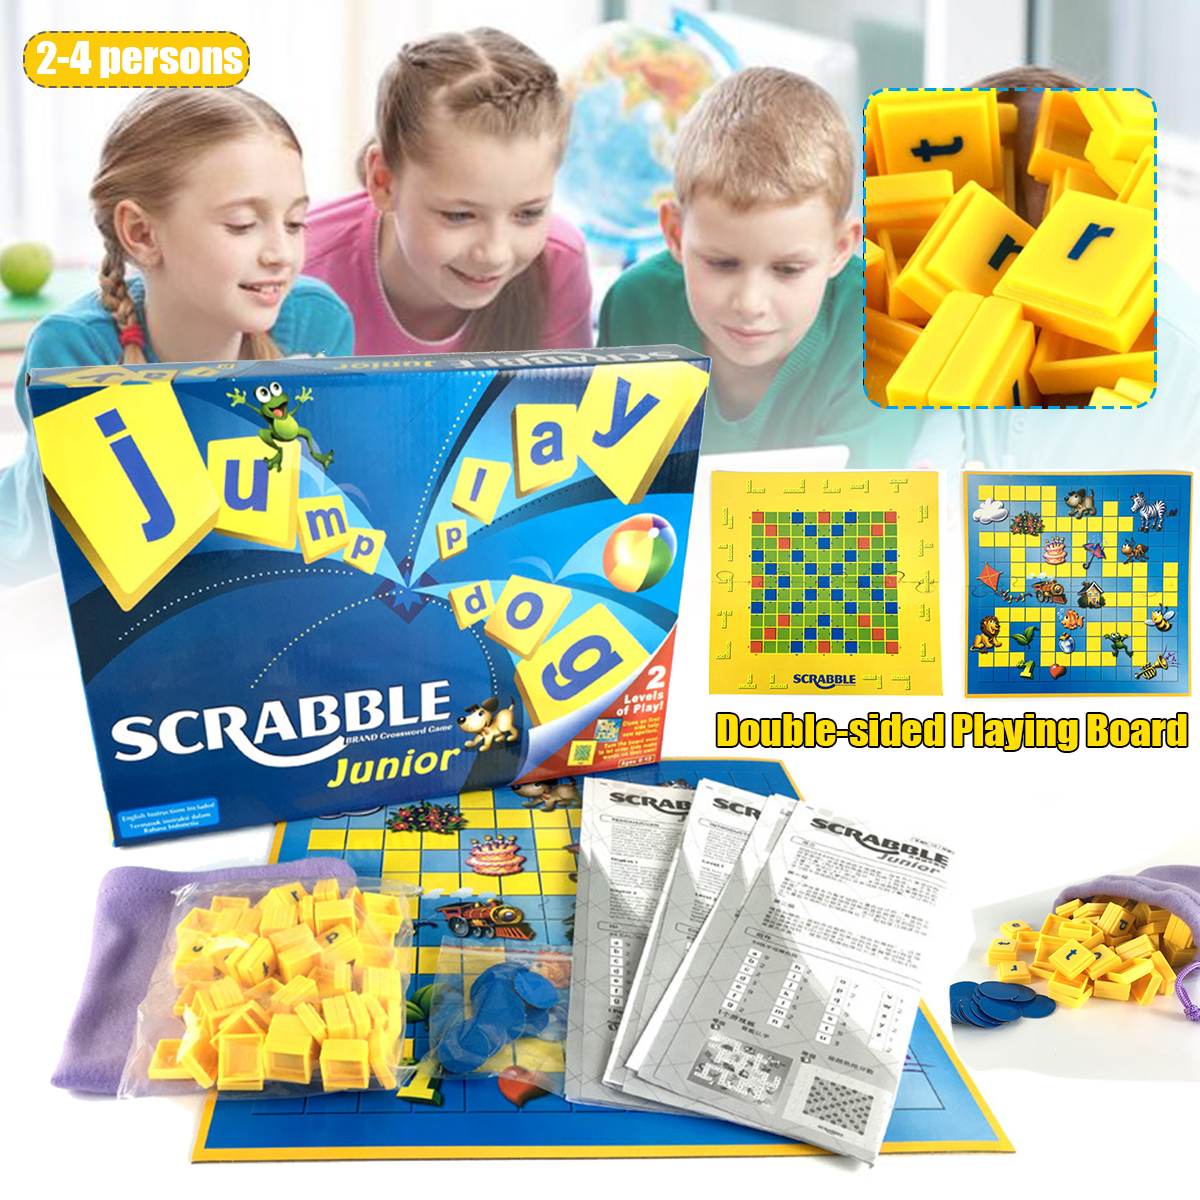 Letter-Crossword-Junior-Board-Game-Funny-Gift-Family-Multiplayer-Interaction-Game-Educational-Toys-1659444-1